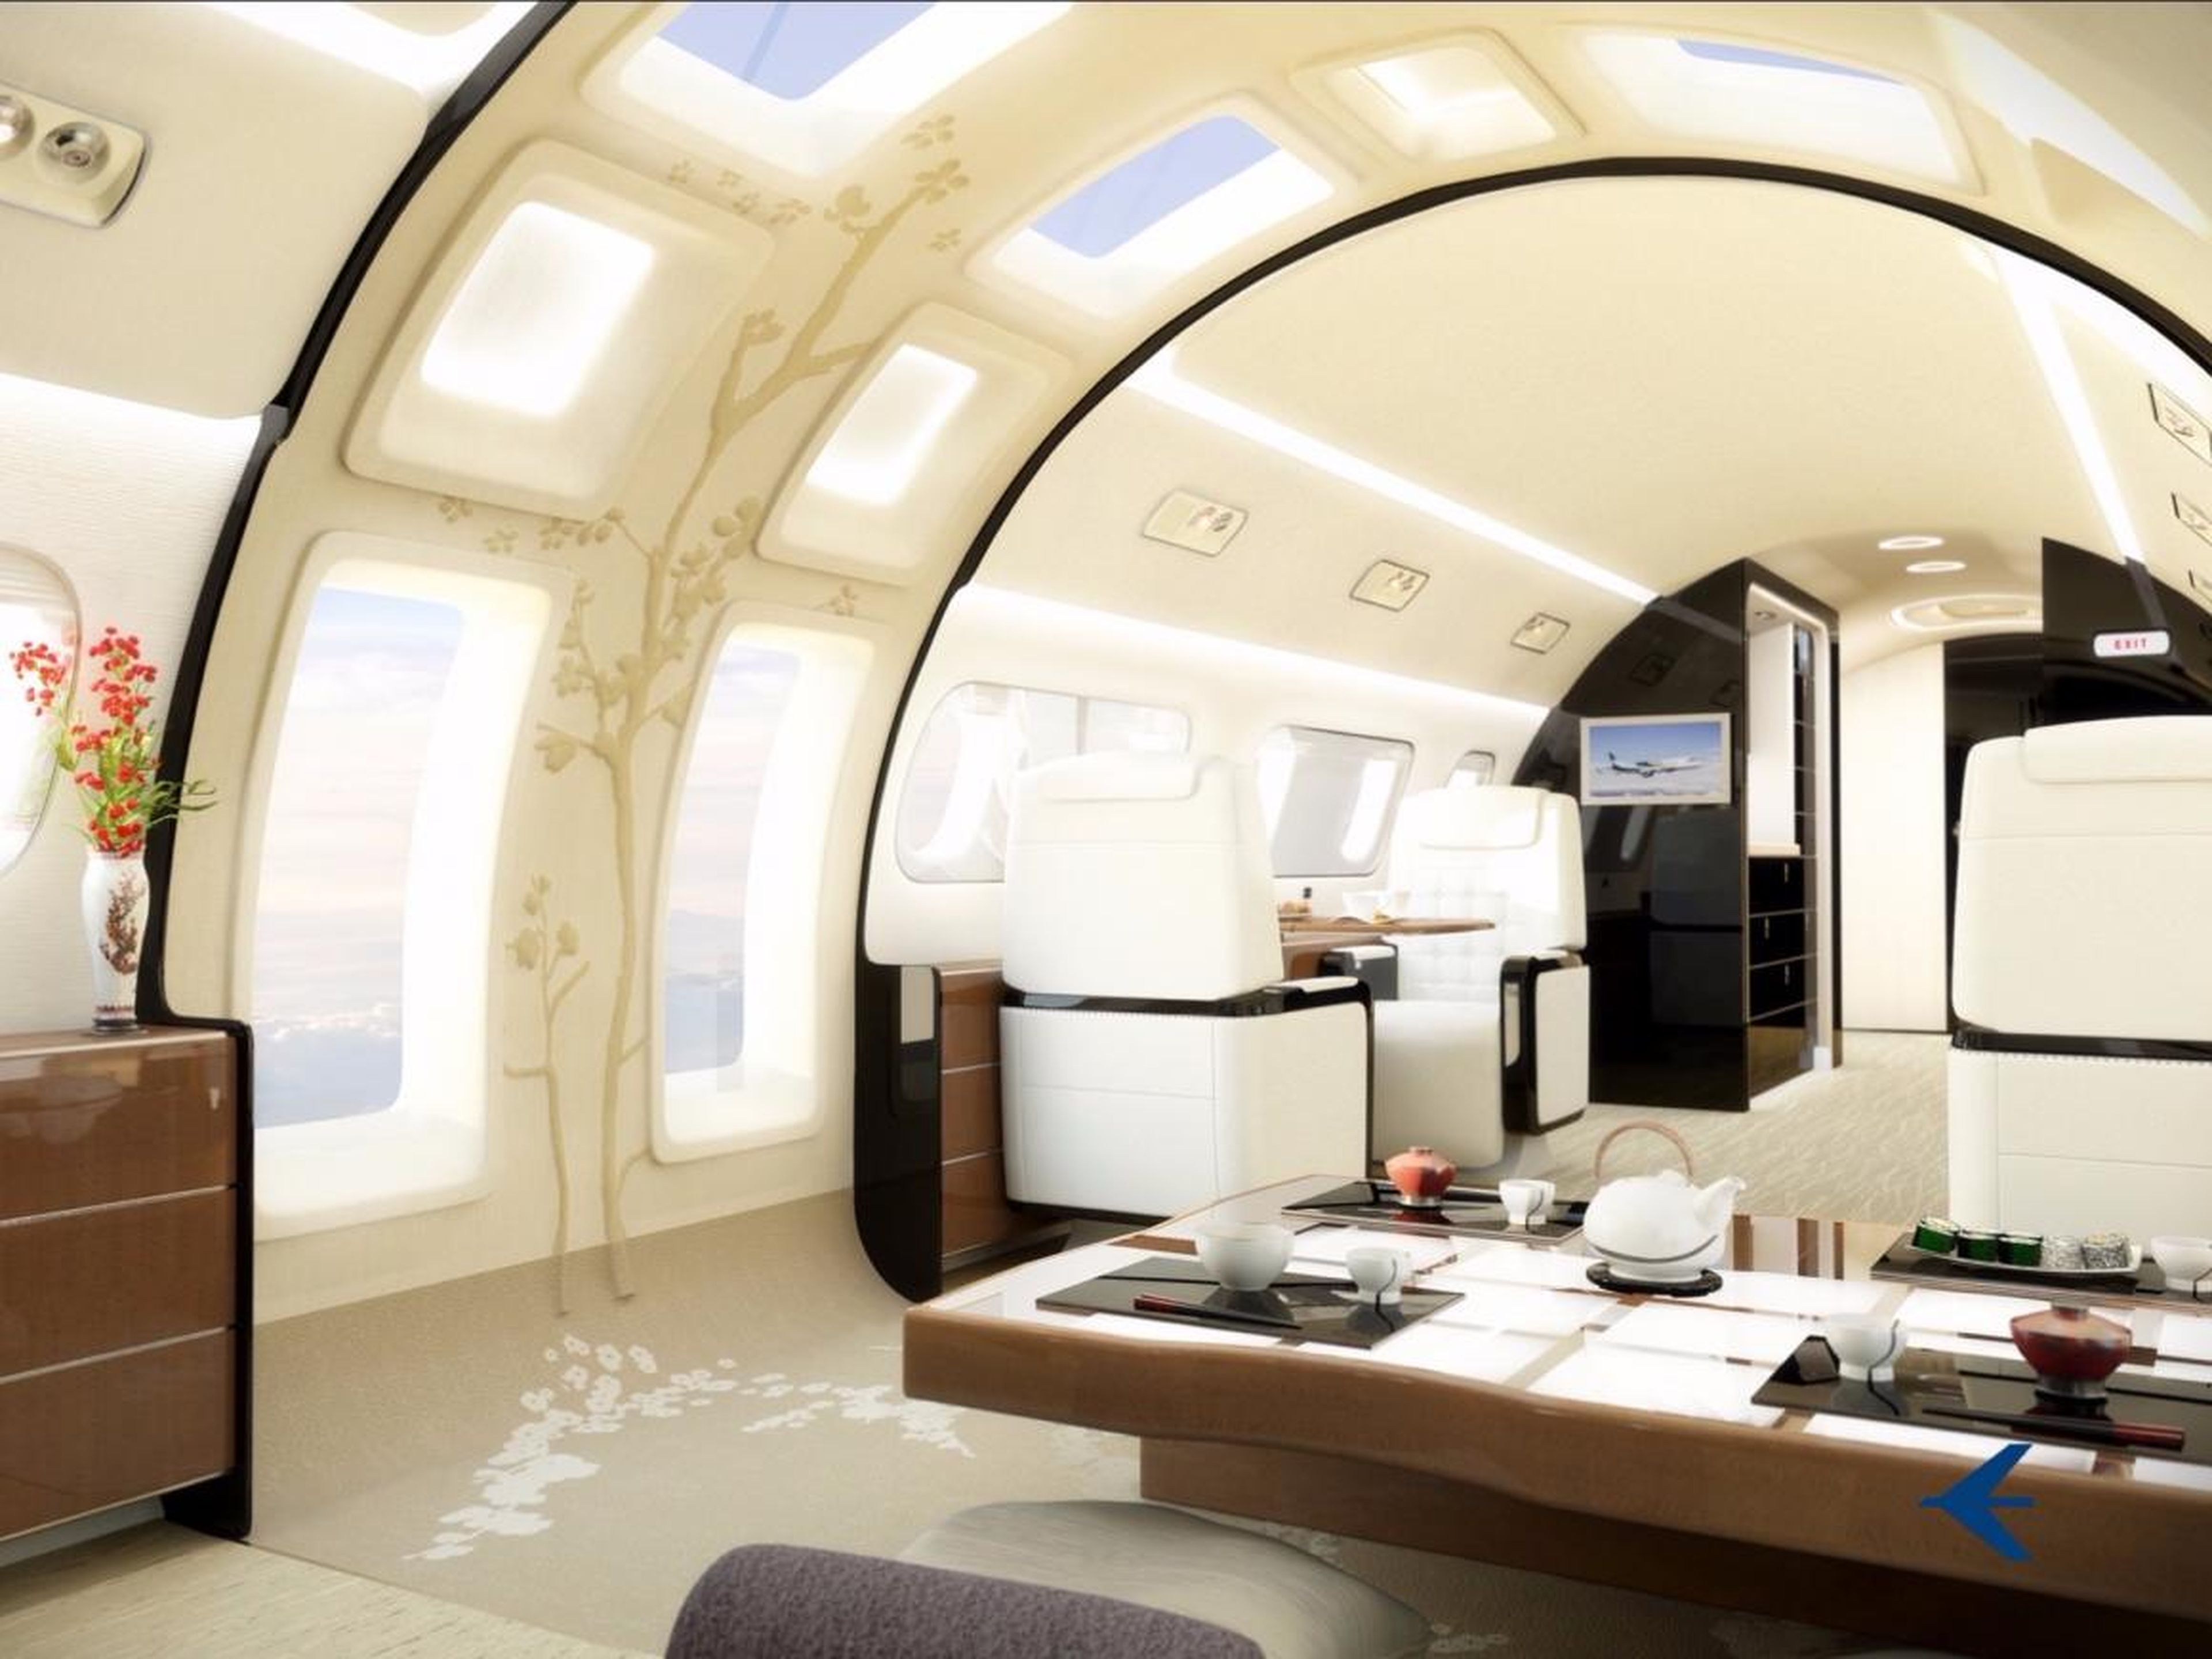 If you are extra bold, however, Embraer's design chief, Jay Beever, will gladly offer you some of his truly over-the-top interior concepts — like the Kyoto Airship and its astonishing skylights ...